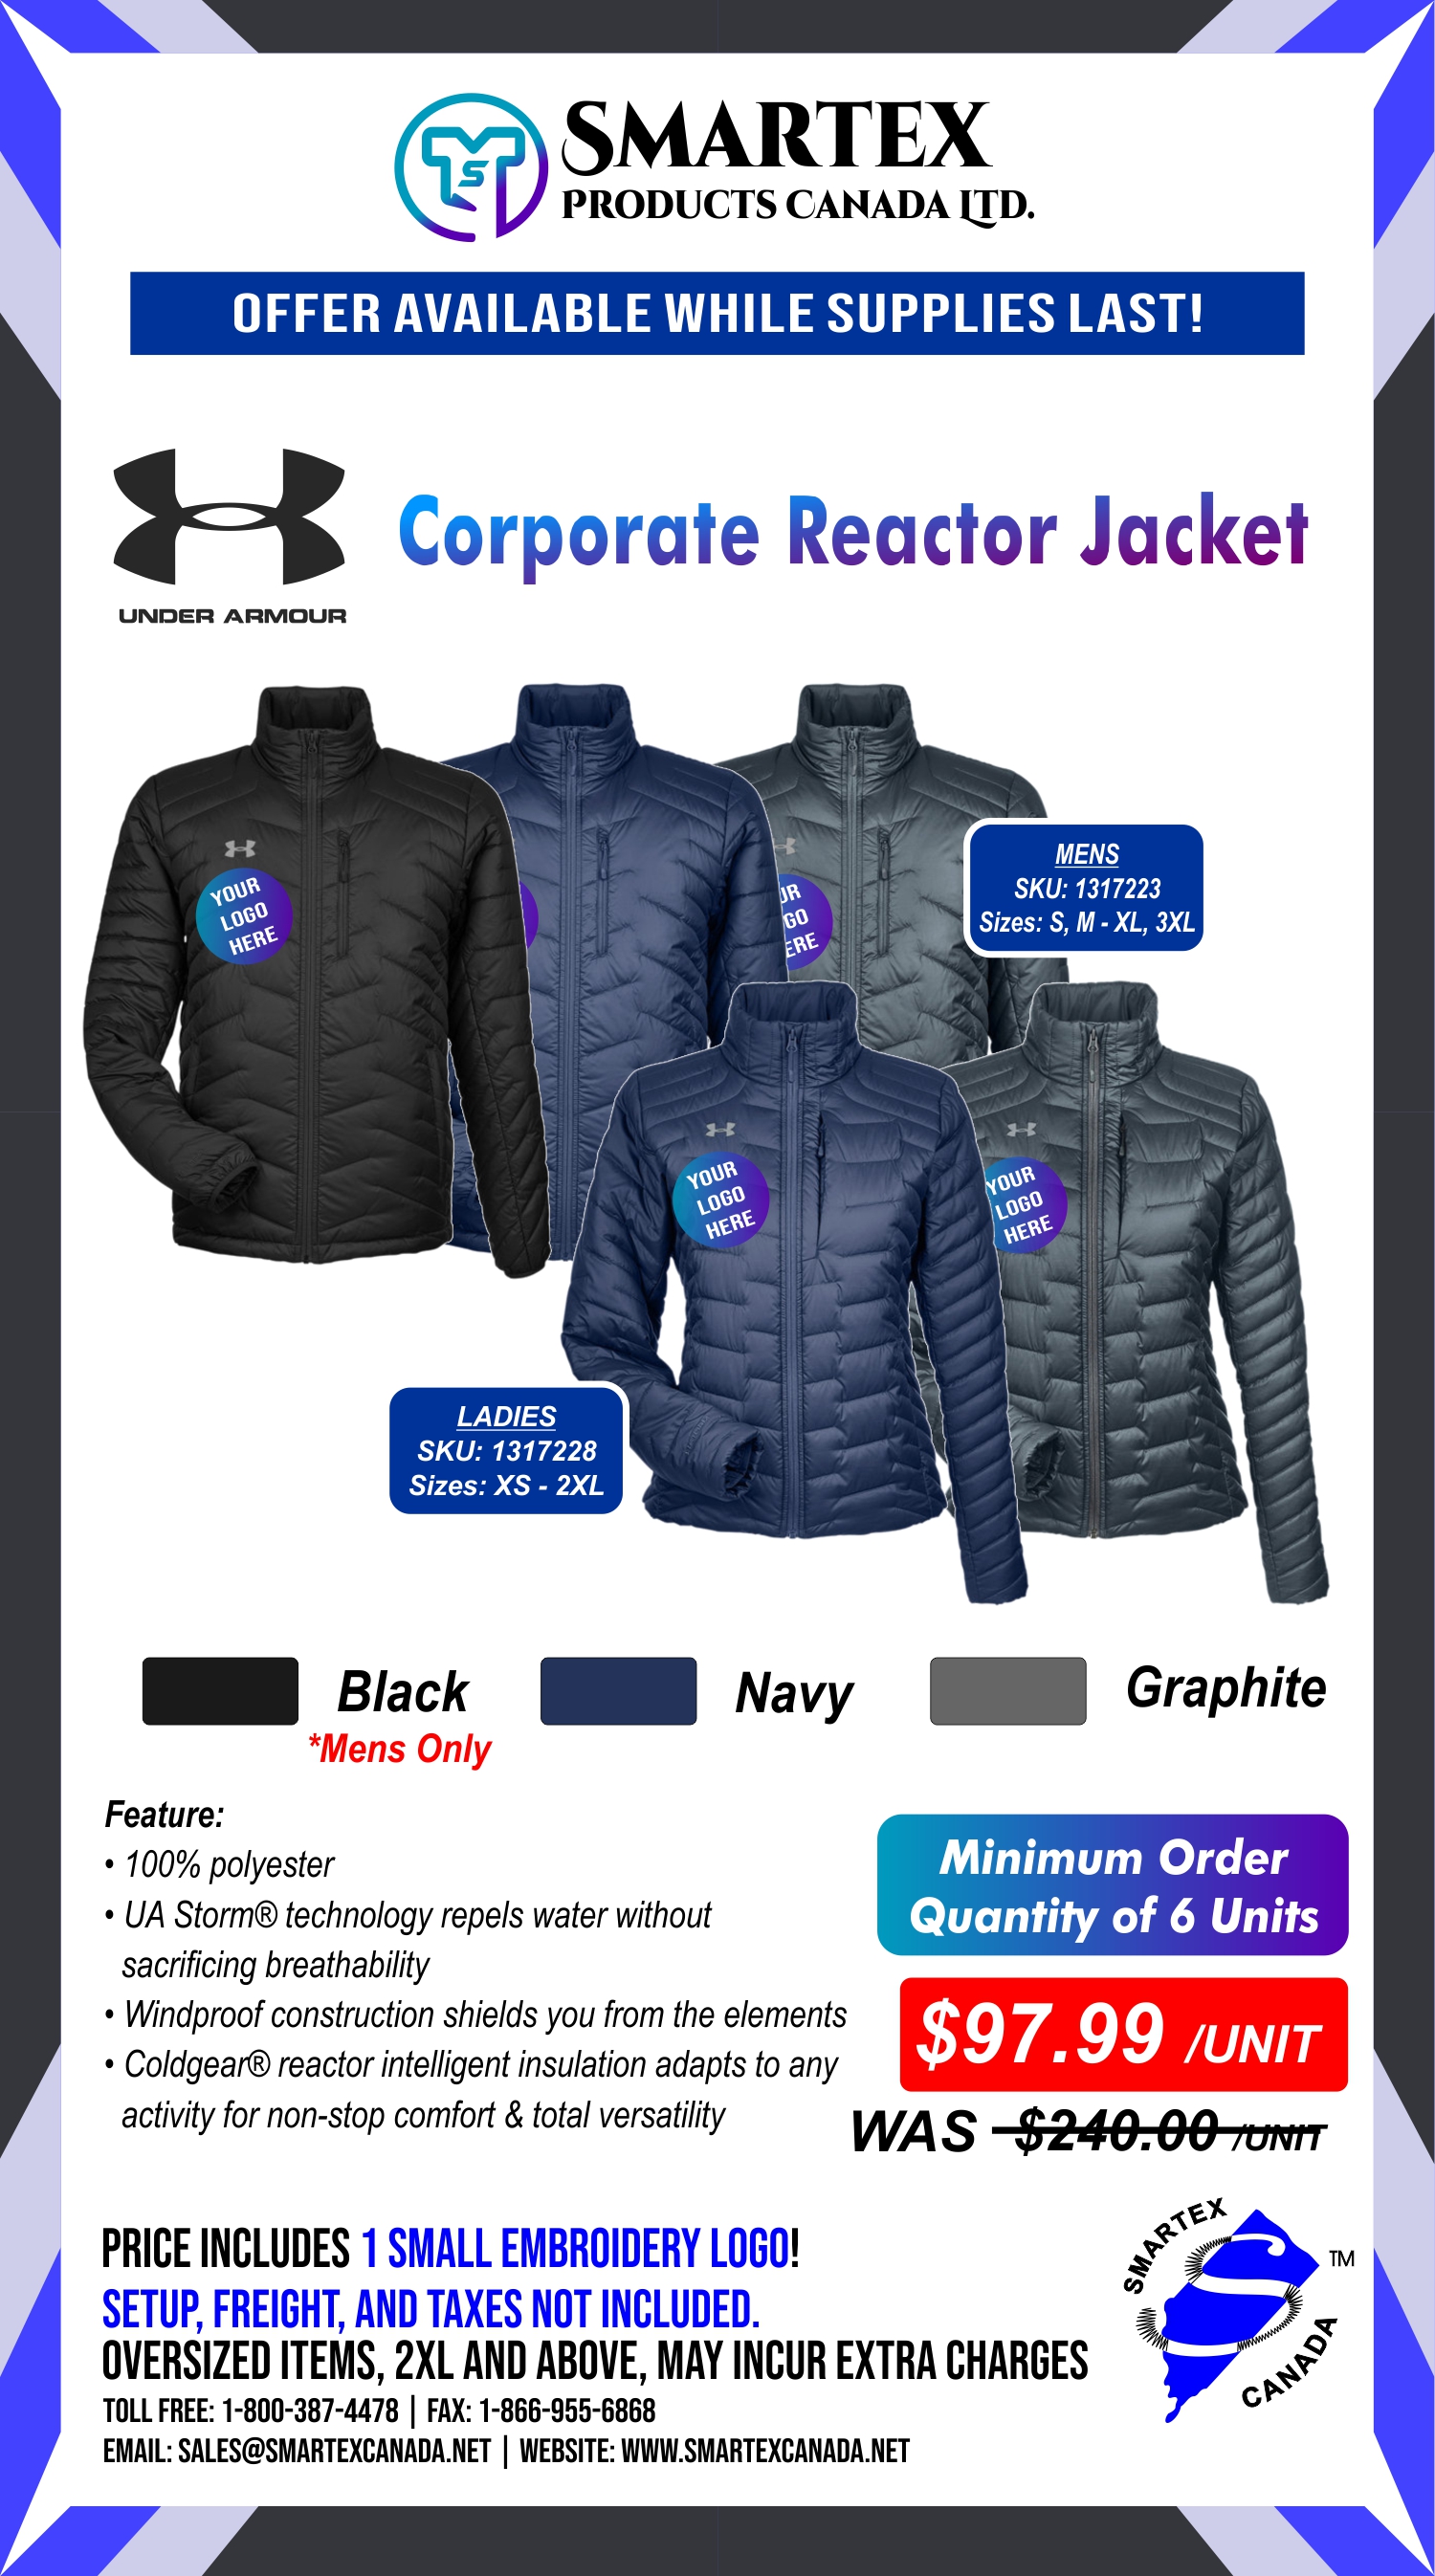 Under Armour Corporate Reactor Jackets